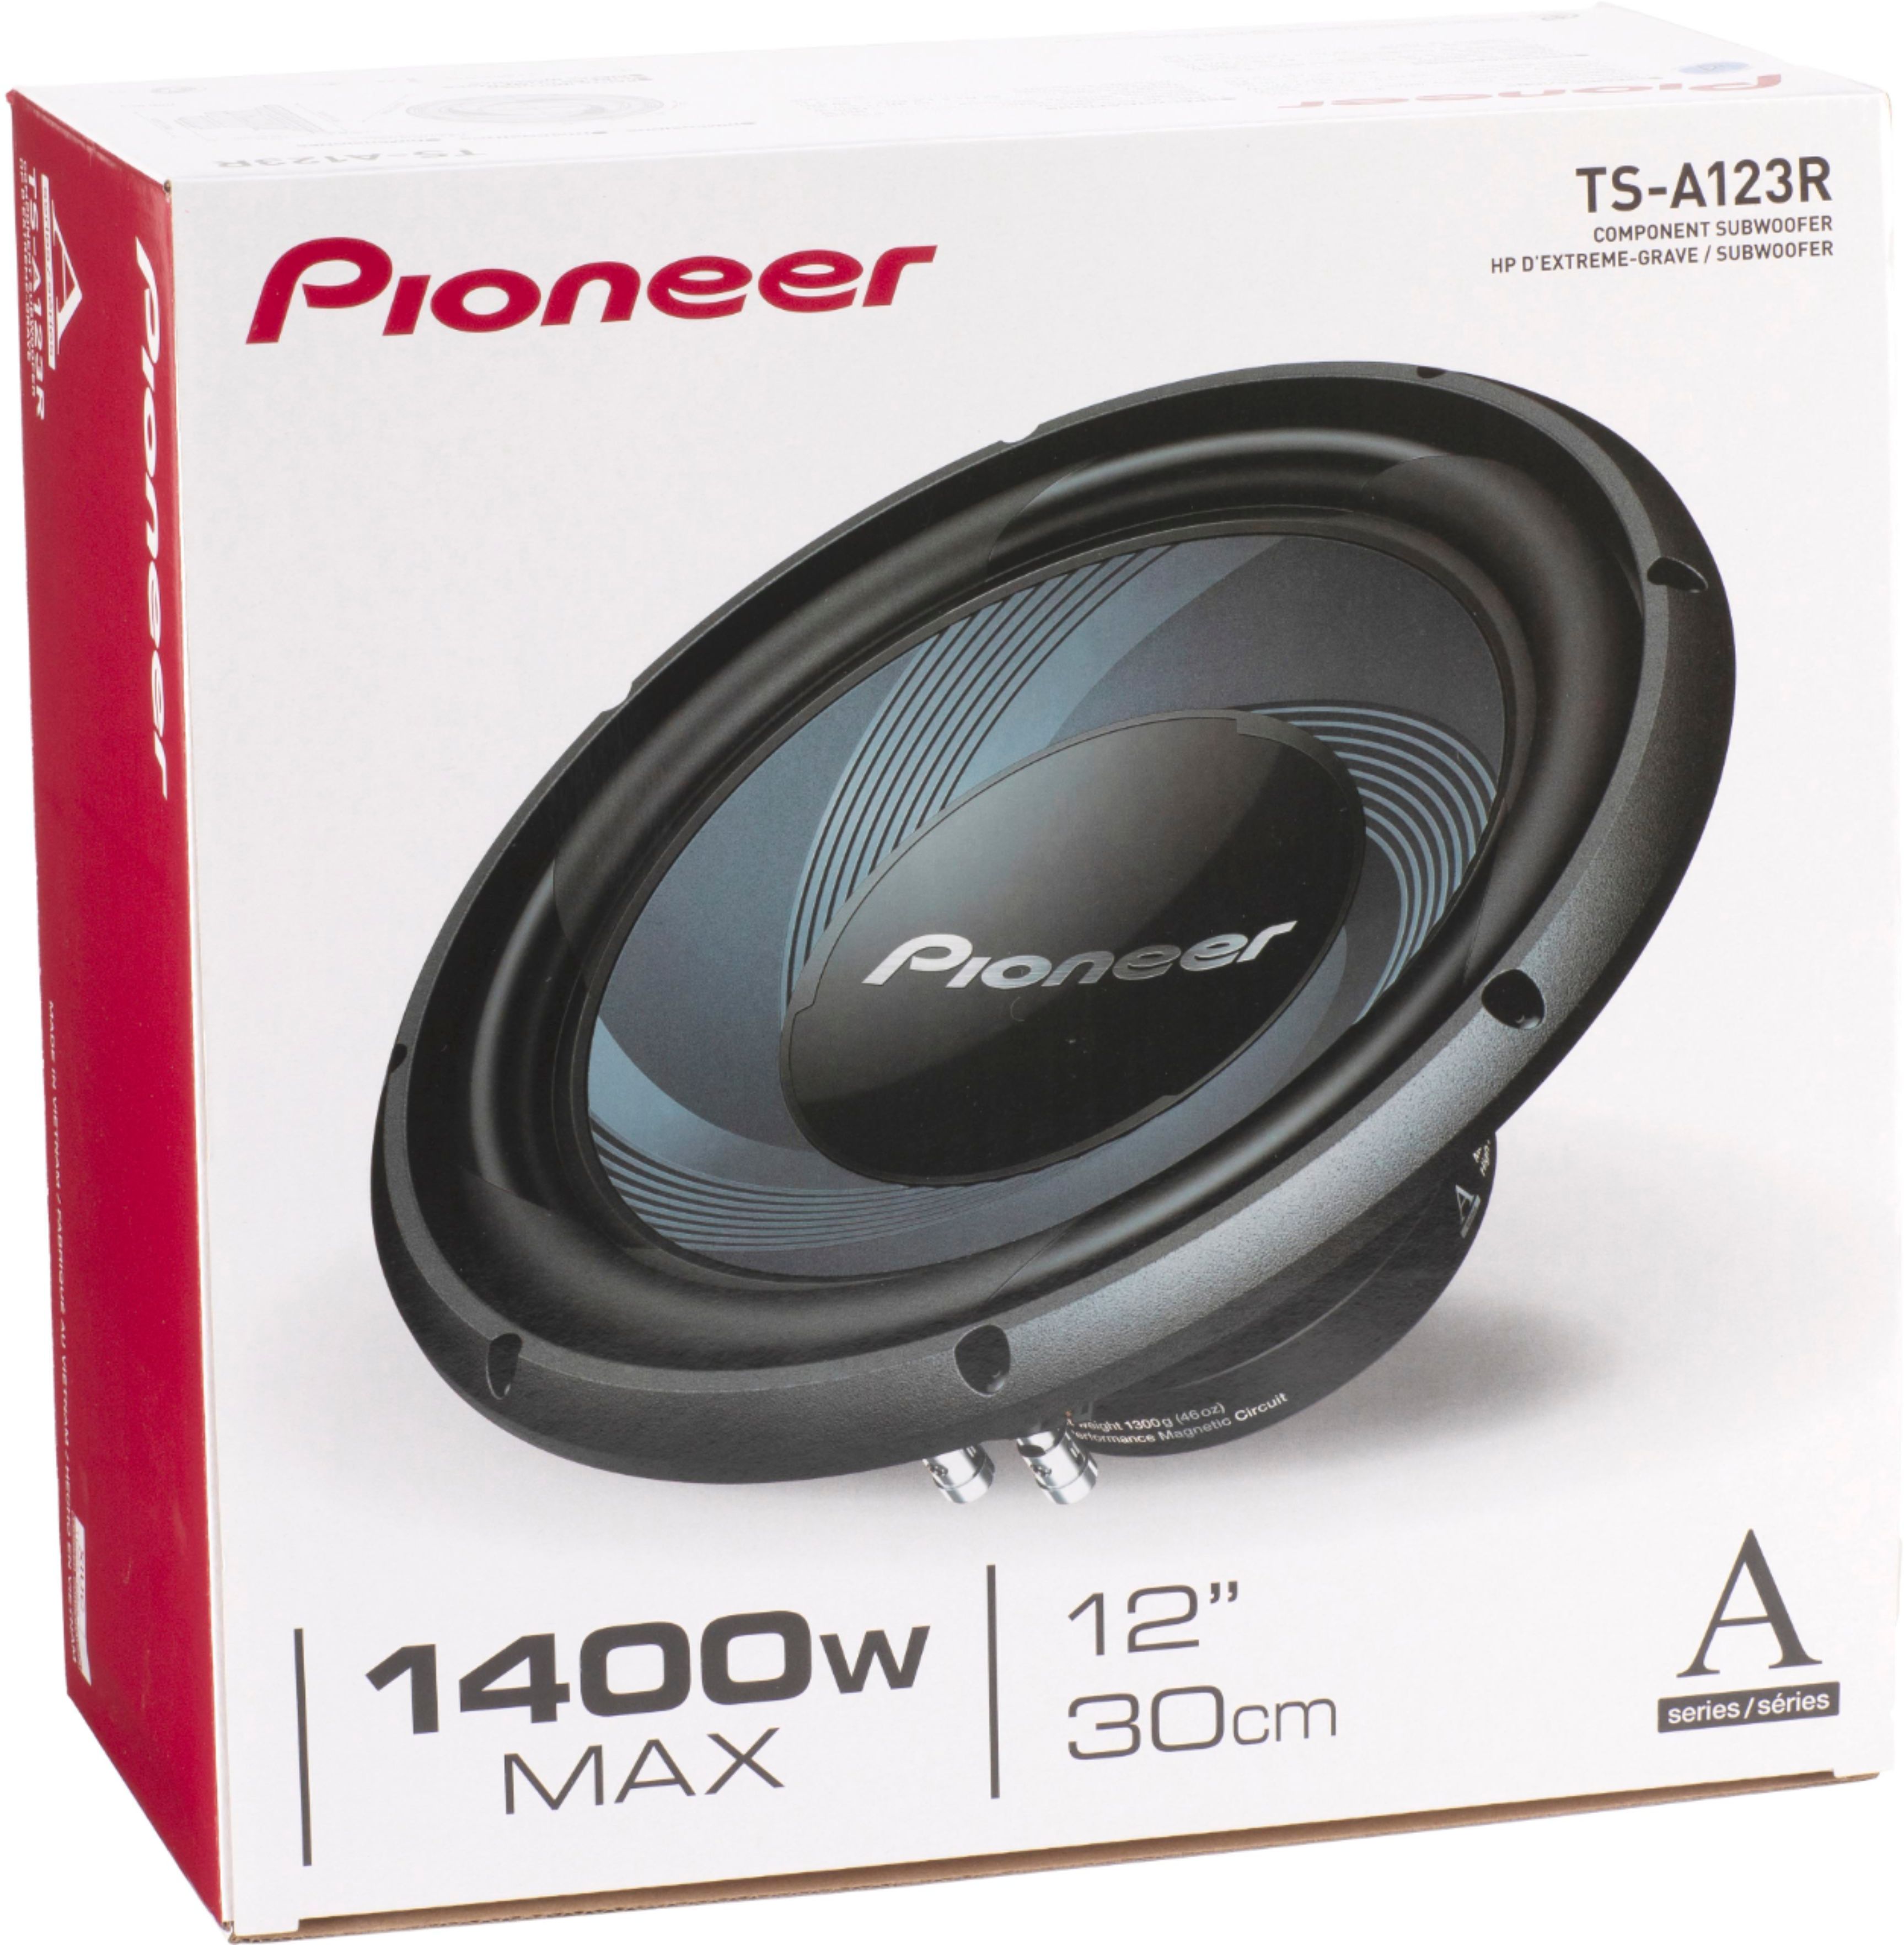 Regan geweer Uitleg Pioneer 12" 1400 W Max Power, Single 4-ohm Voice Coil, IMPP cone, Rubber  Surround Component Subwoofer BLUE TS-A123R - Best Buy